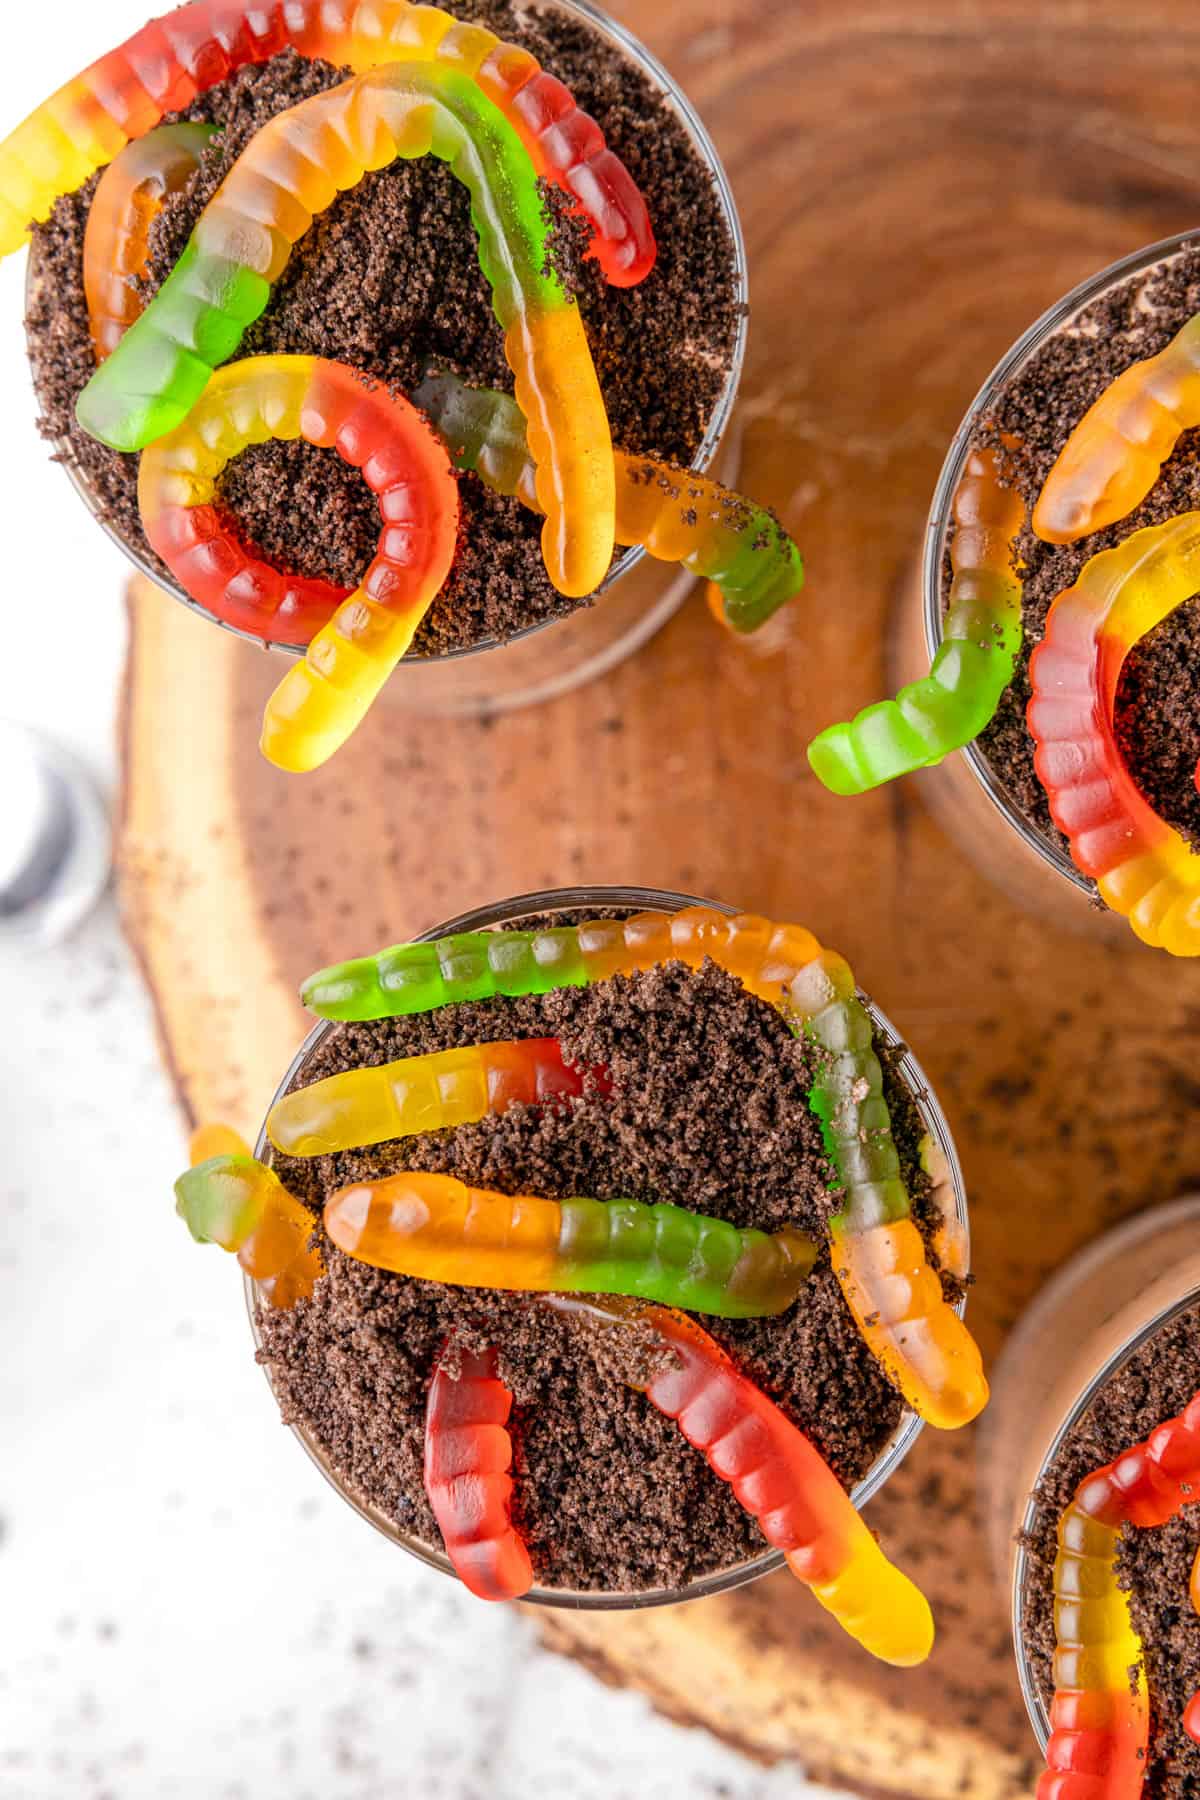 Gummy worms on top of crushed Oreo cookies.